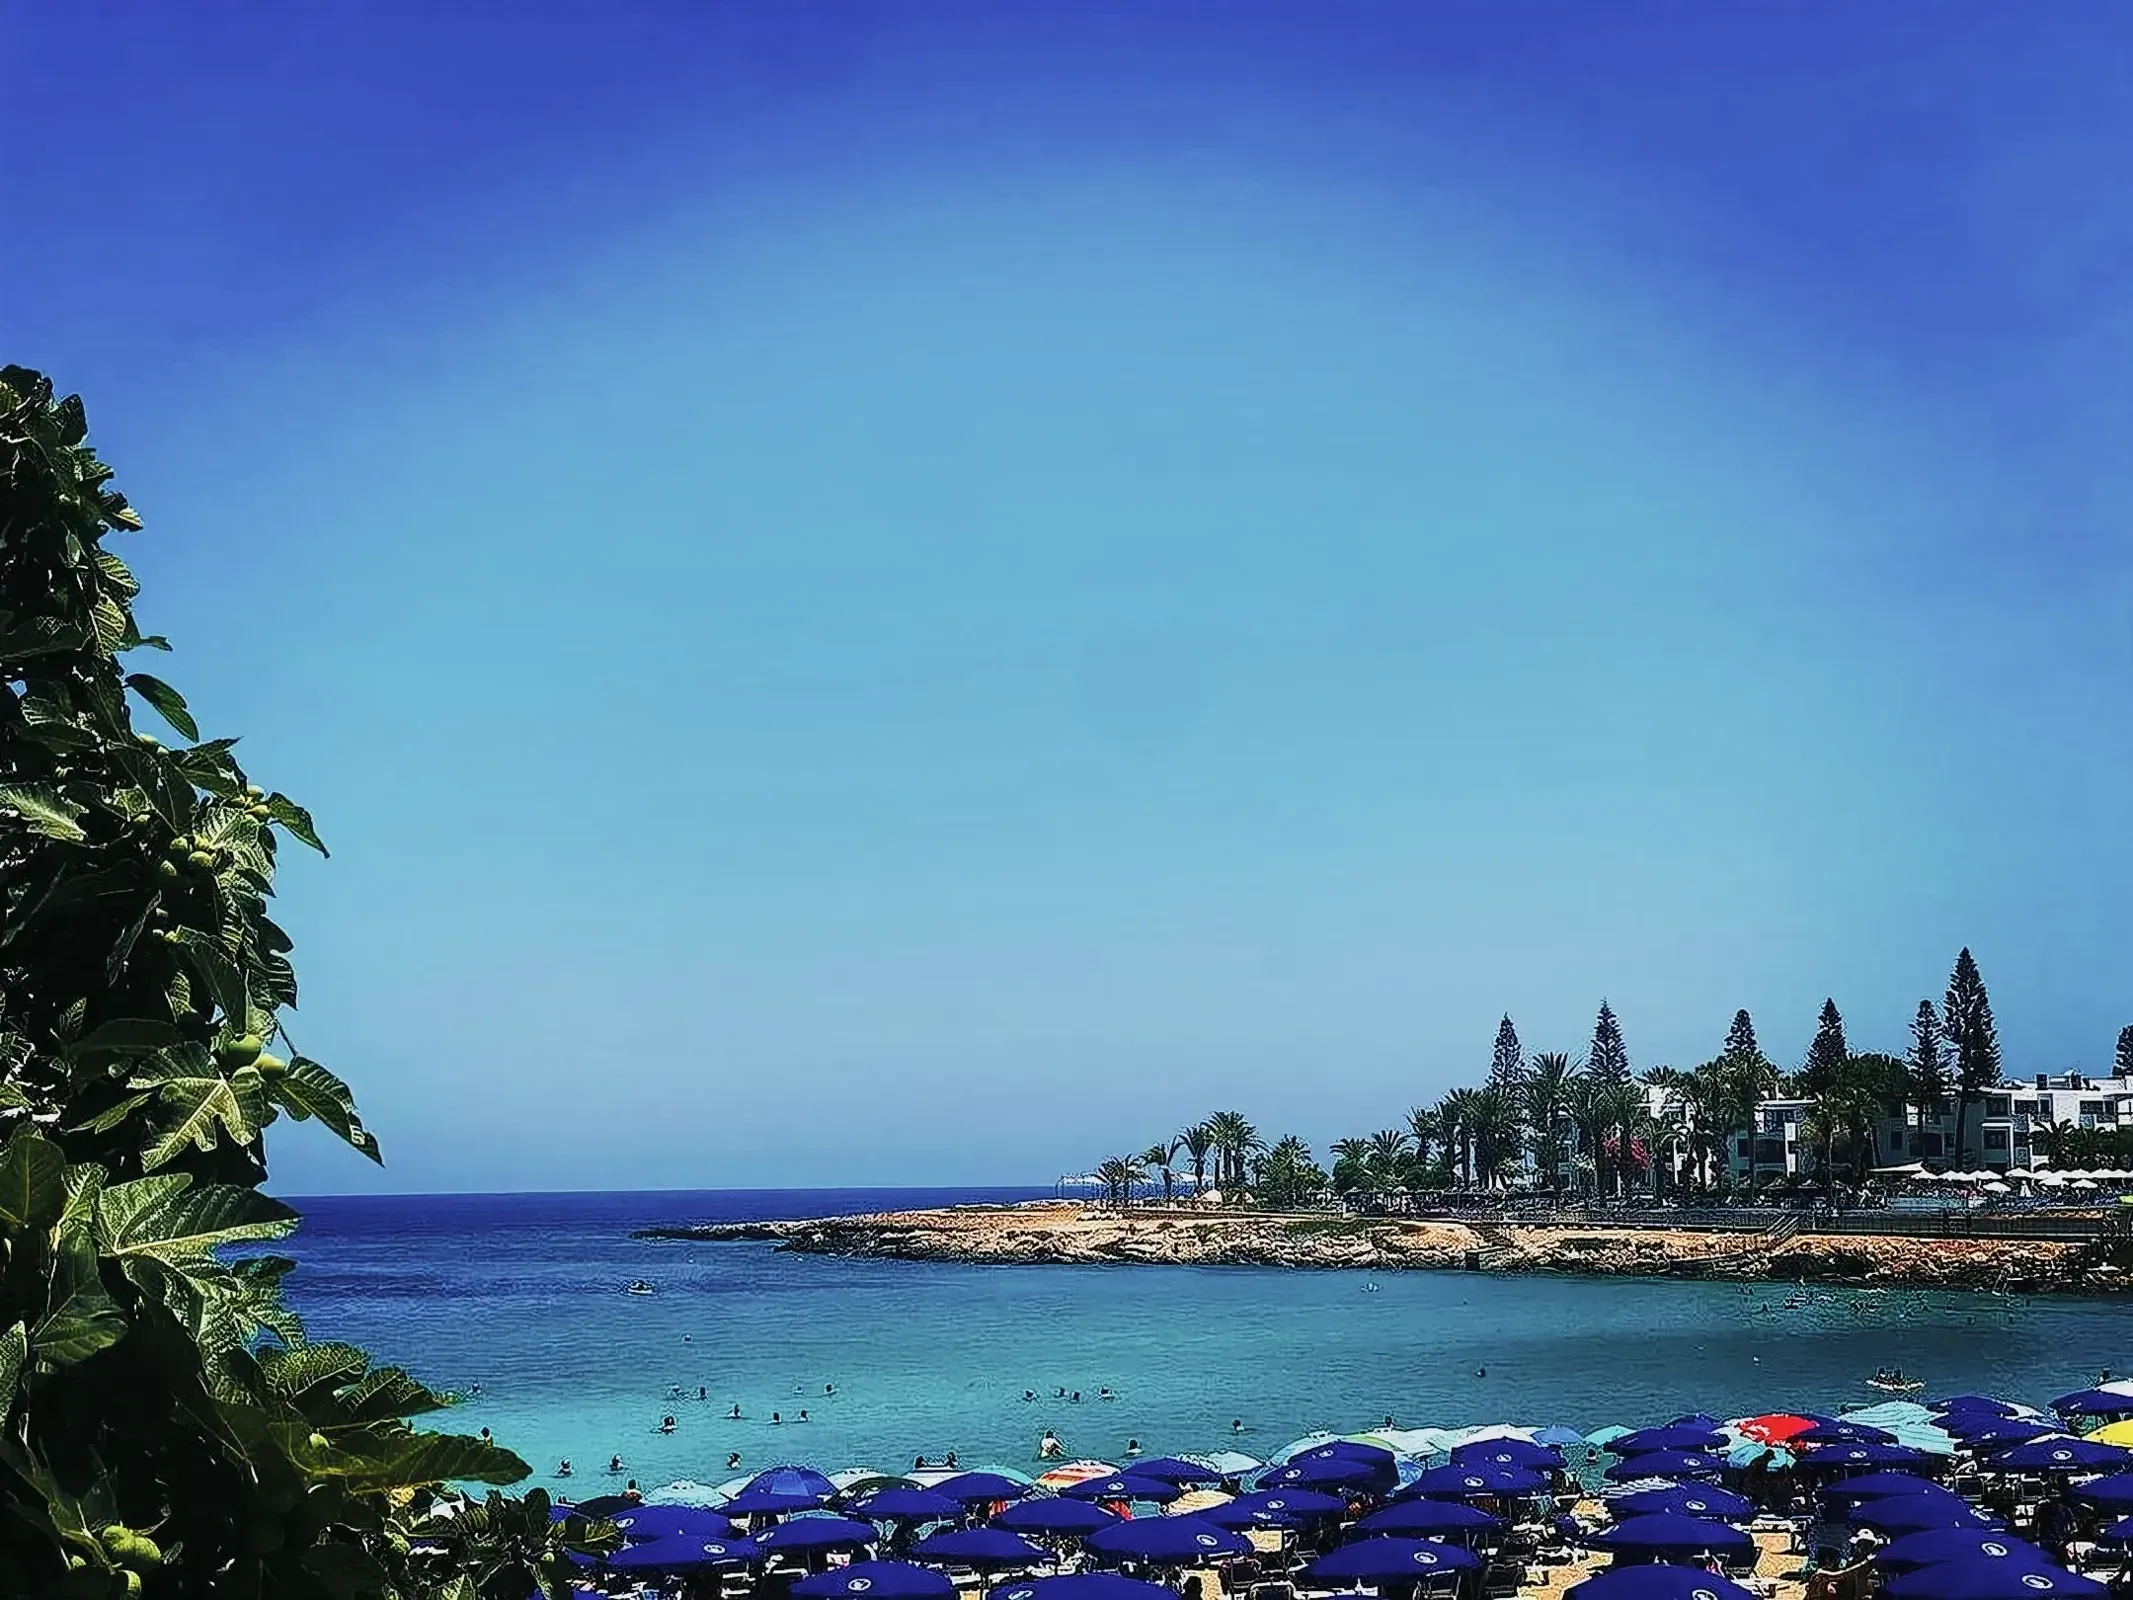 Tropical beach with azure waters and greenery in Protaras, Cyprus